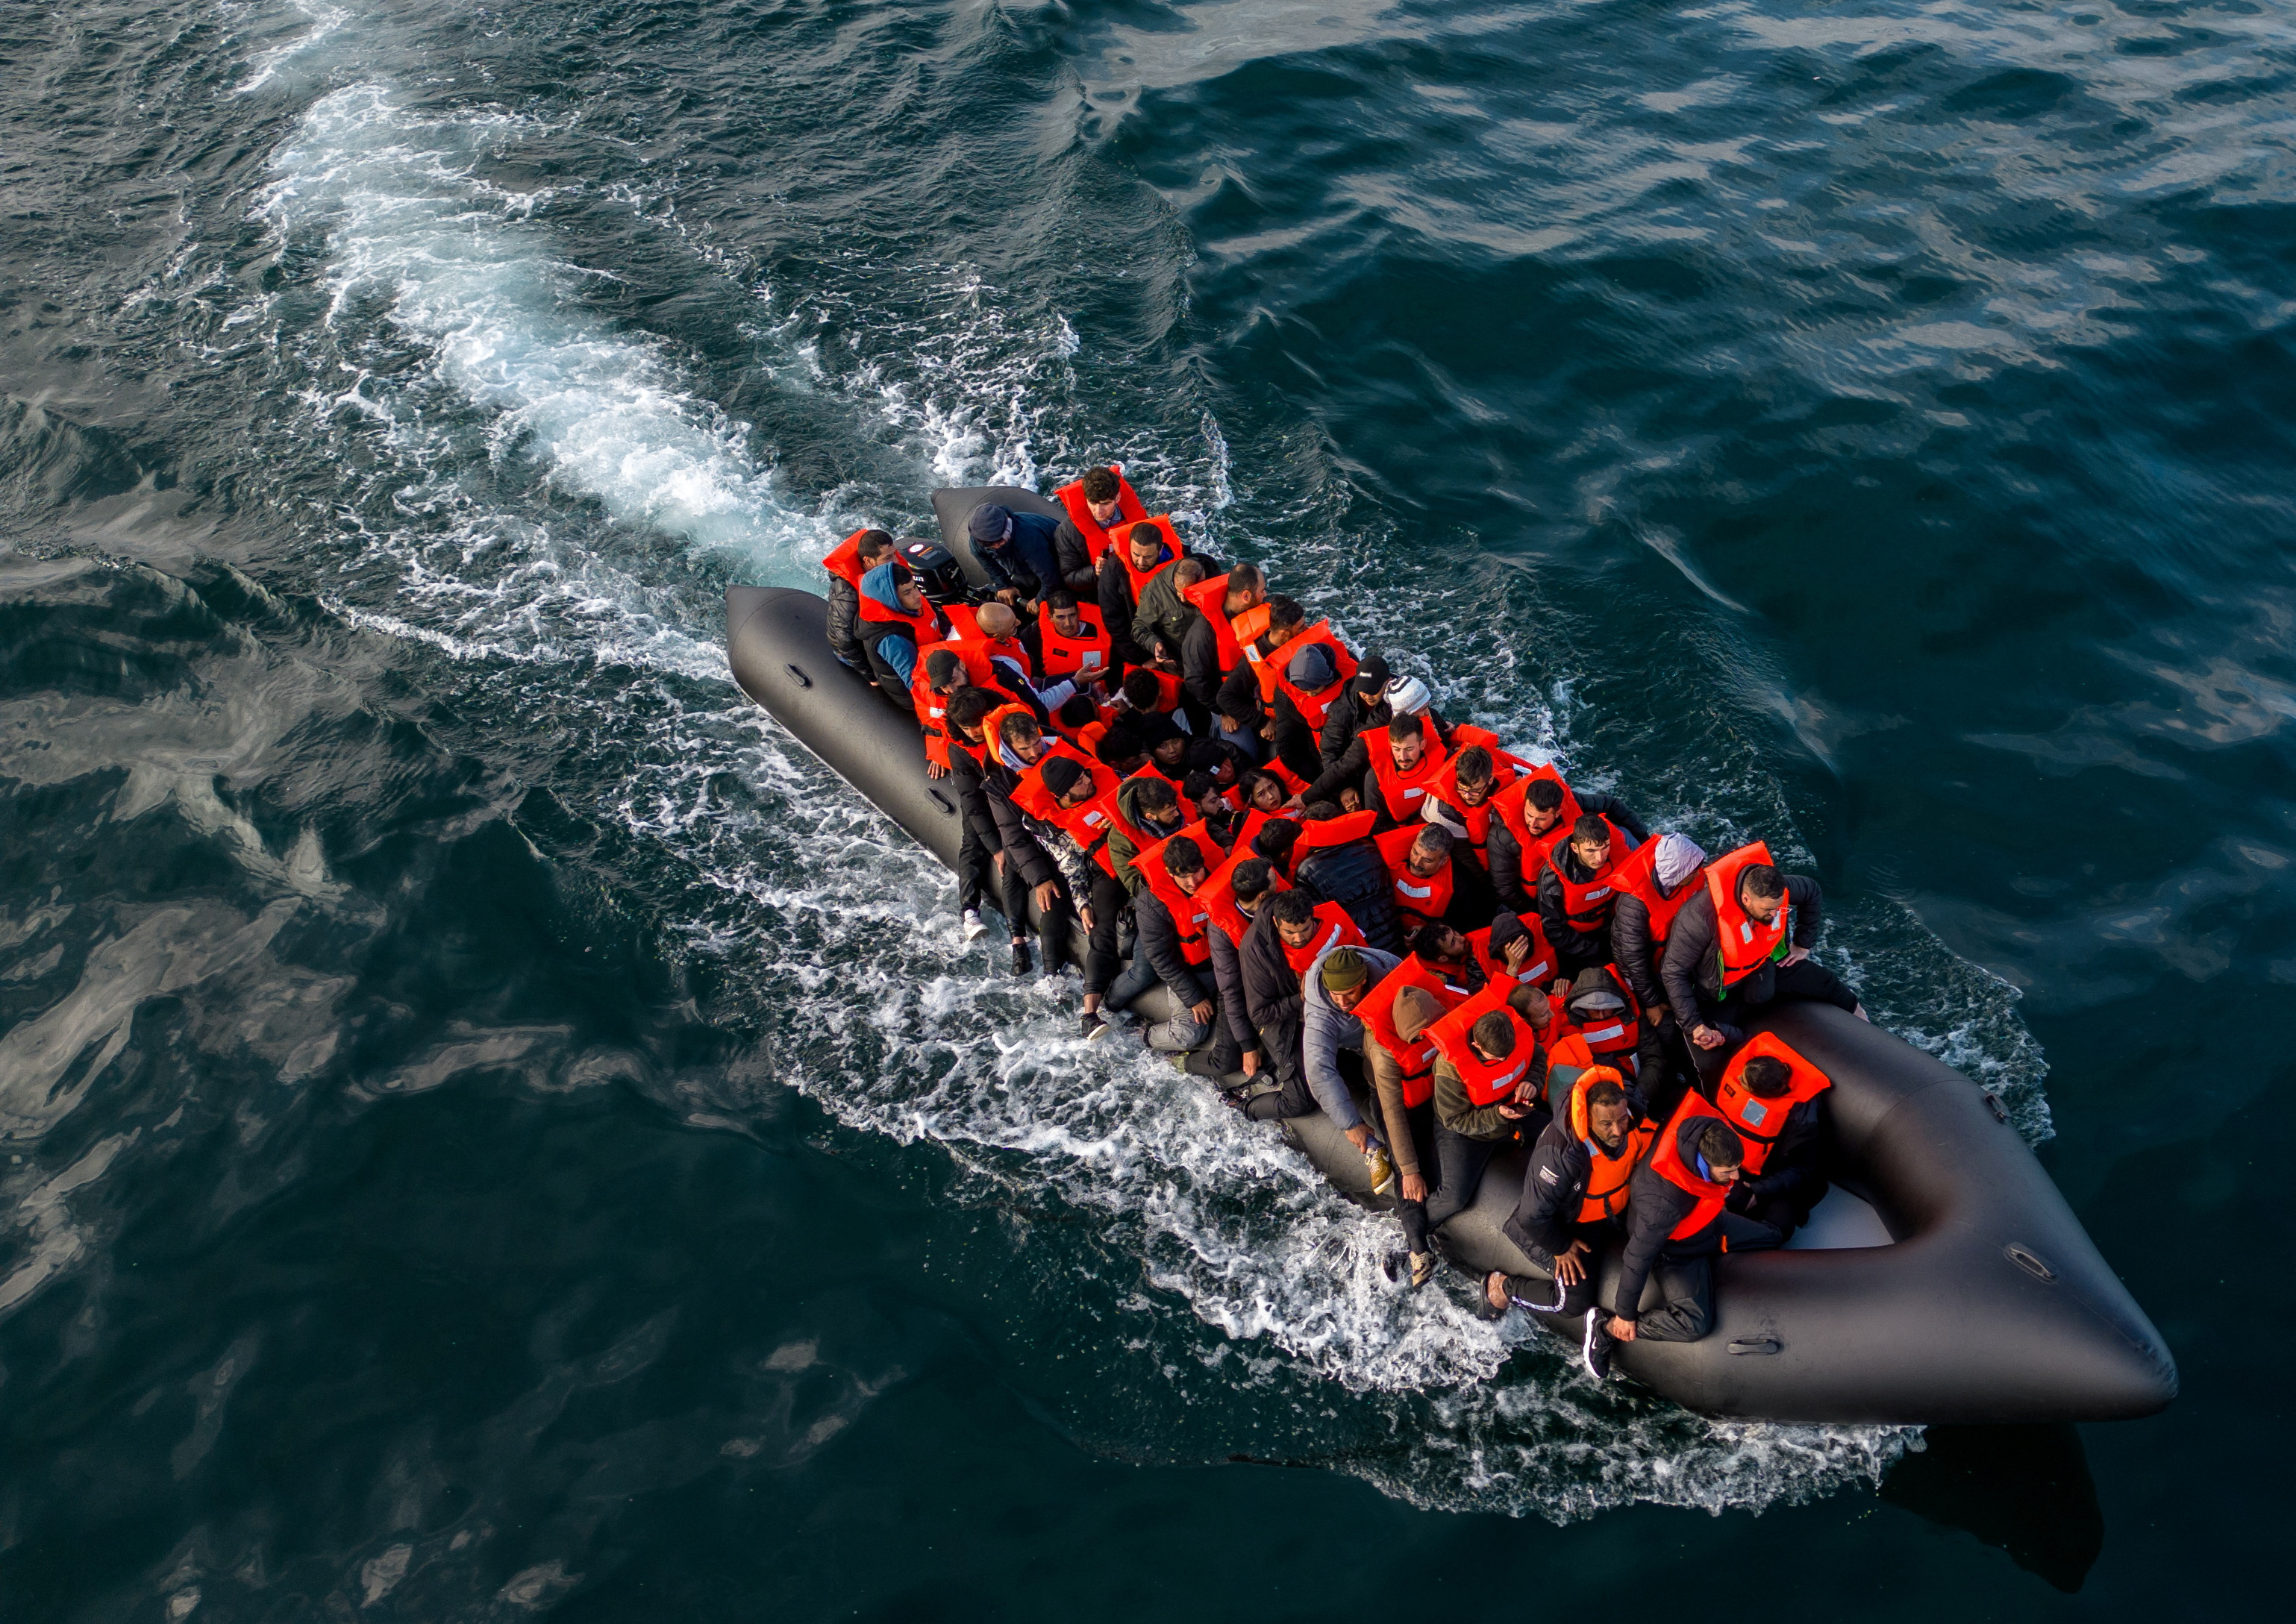 Migrants cross the English Channel in small boats